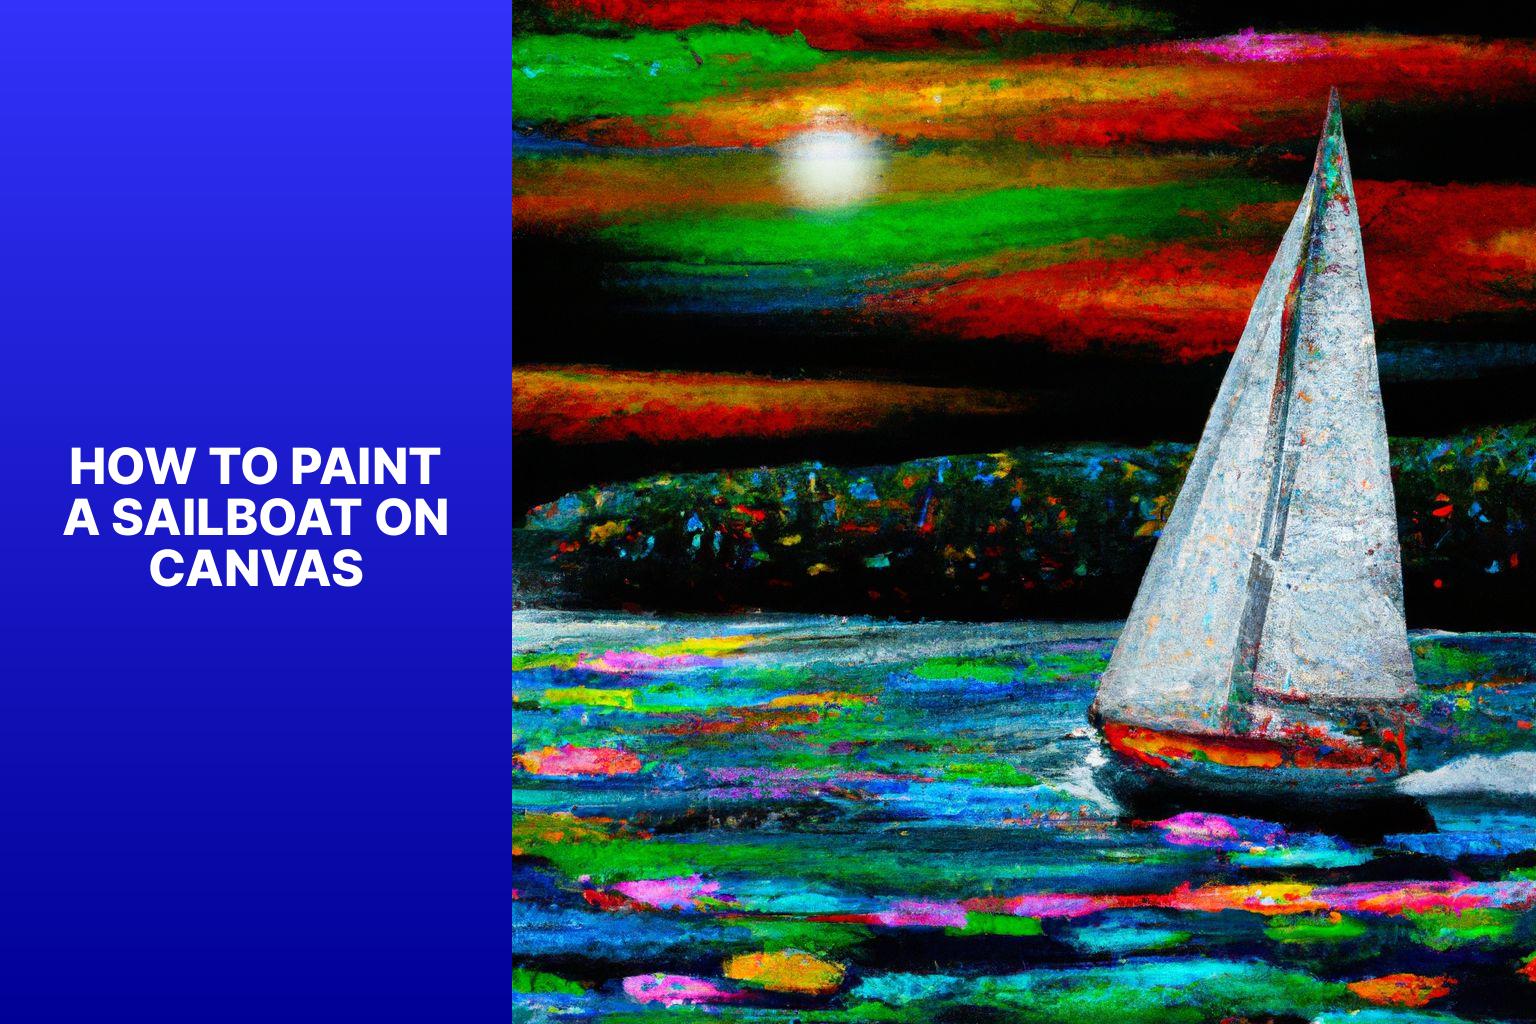 Master the Art of Painting a Sailboat on Canvas with These Step-by-Step Instructions